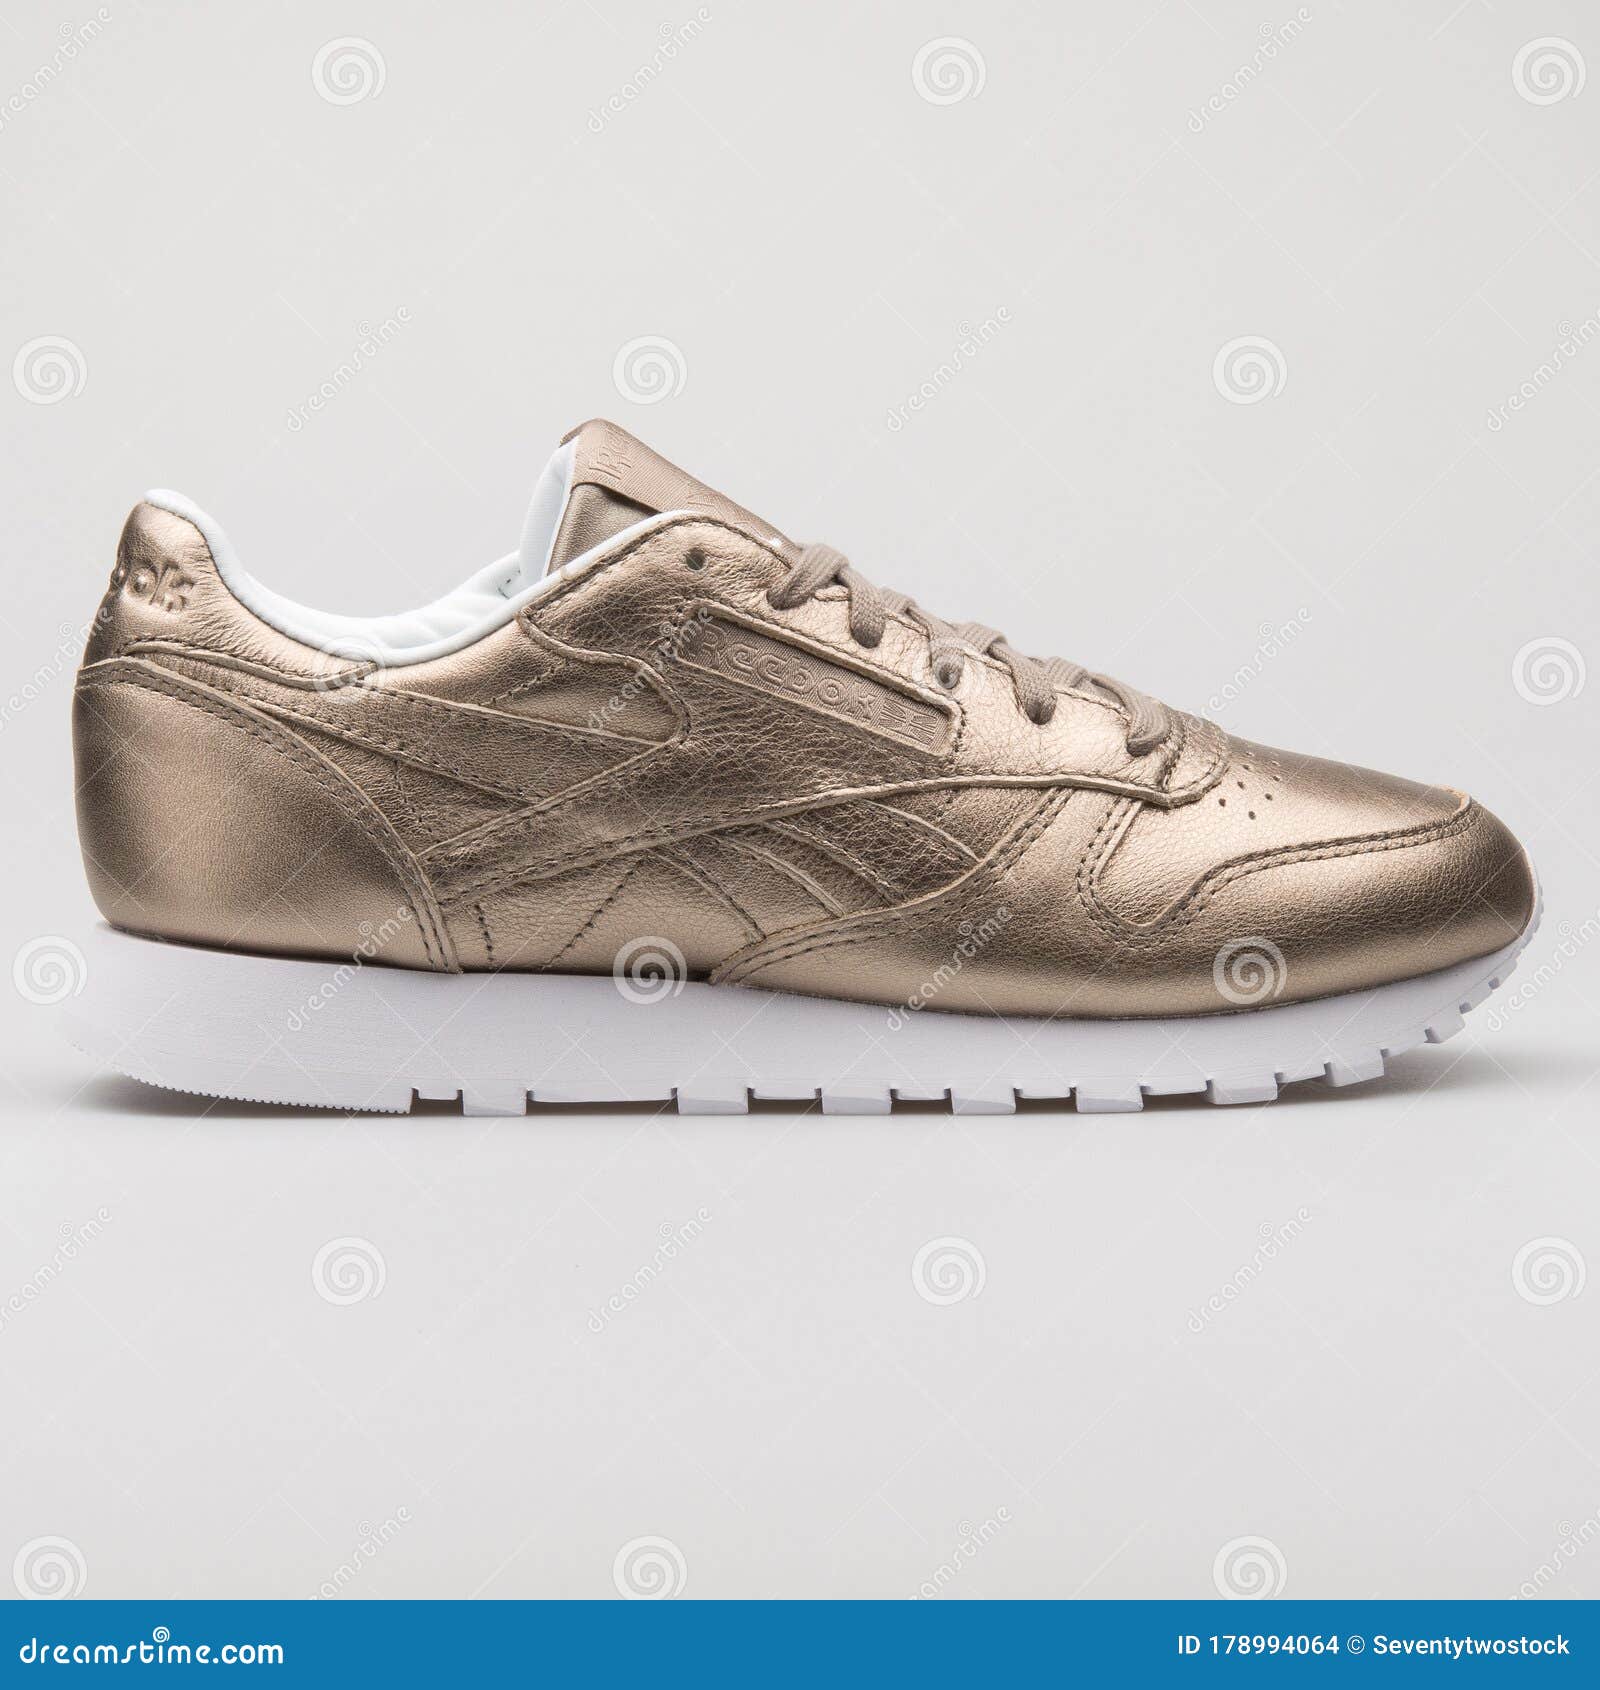 Classic Leather Melted Metal Grey and Gold Sneaker Editorial Stock Image - Image of fitness, accessories: 178994064